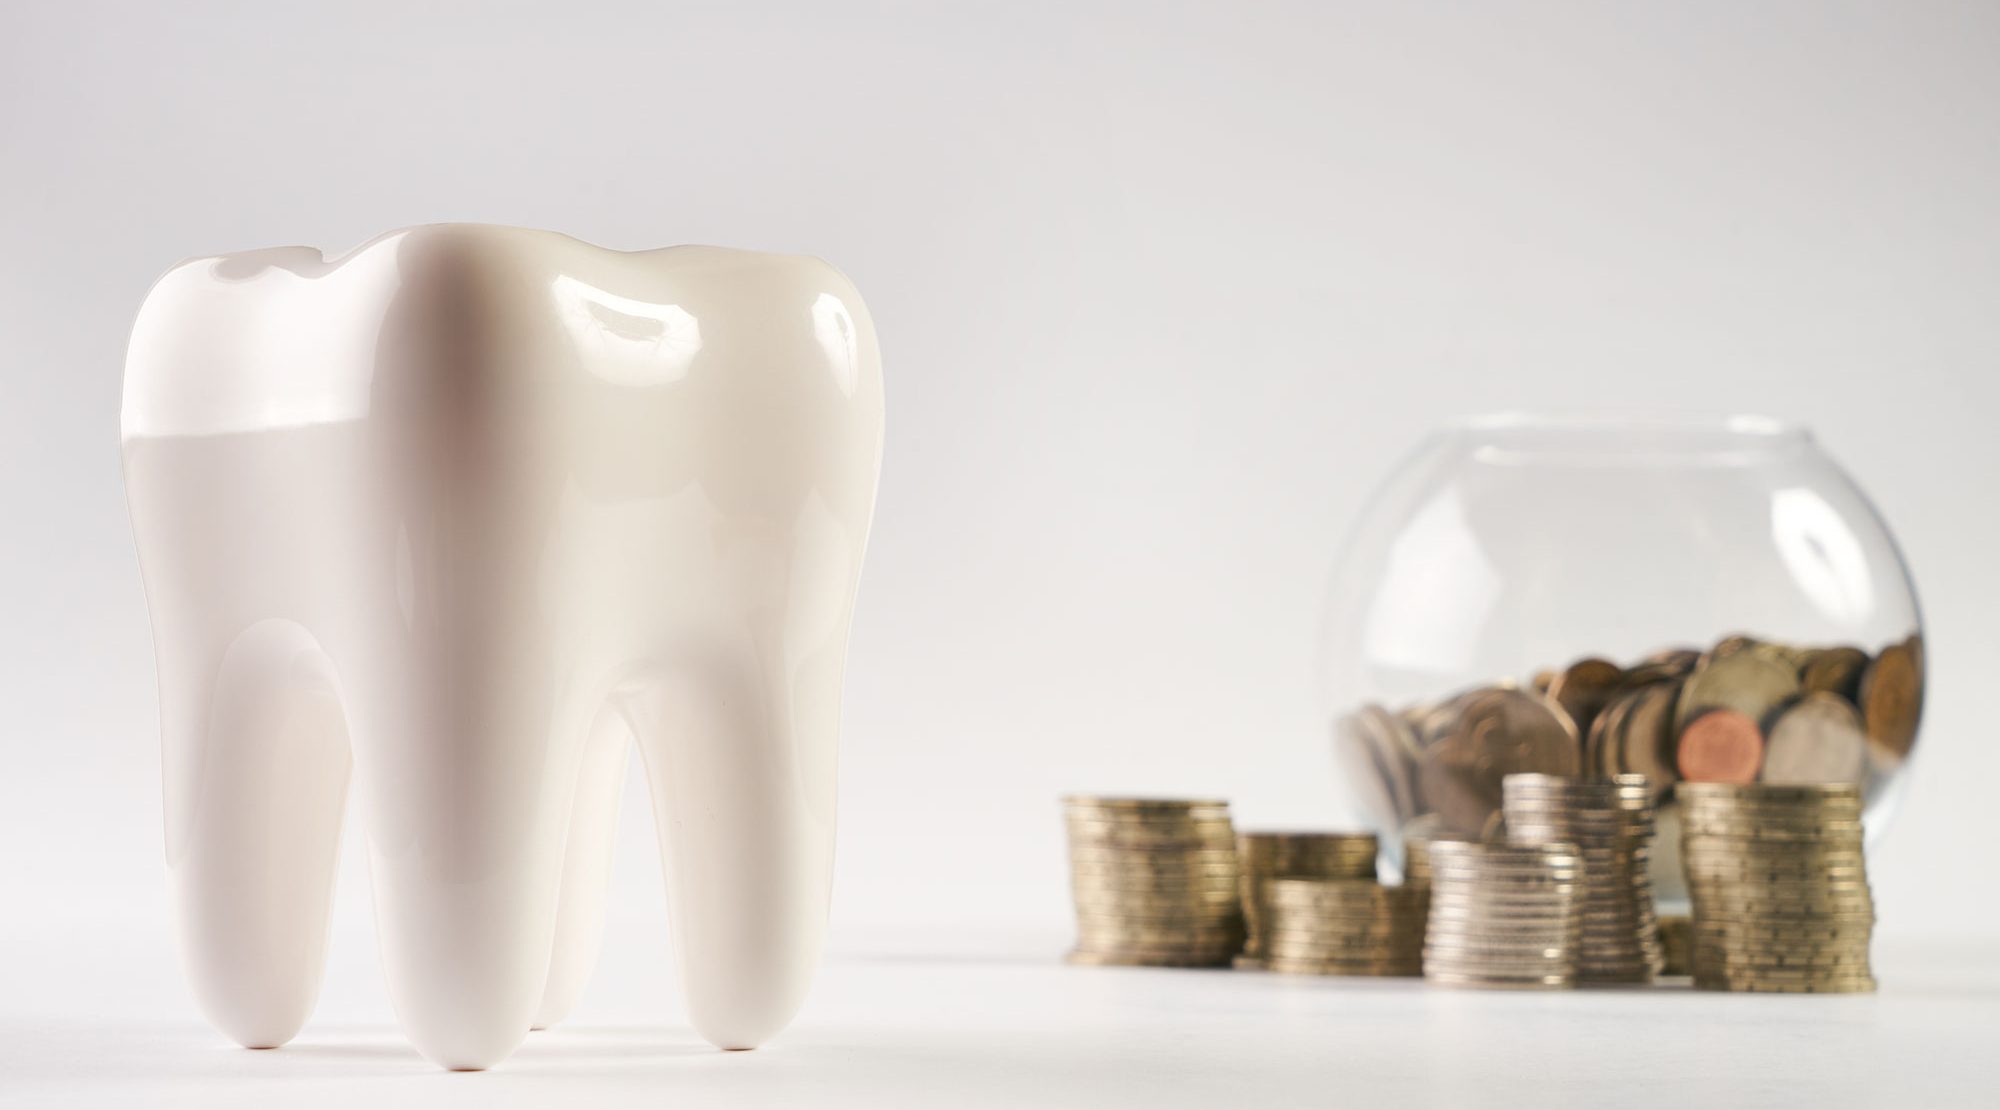 The General Dental Council (GDC) will not make changes to ARF payments in response to COVID-19, it has confirmed